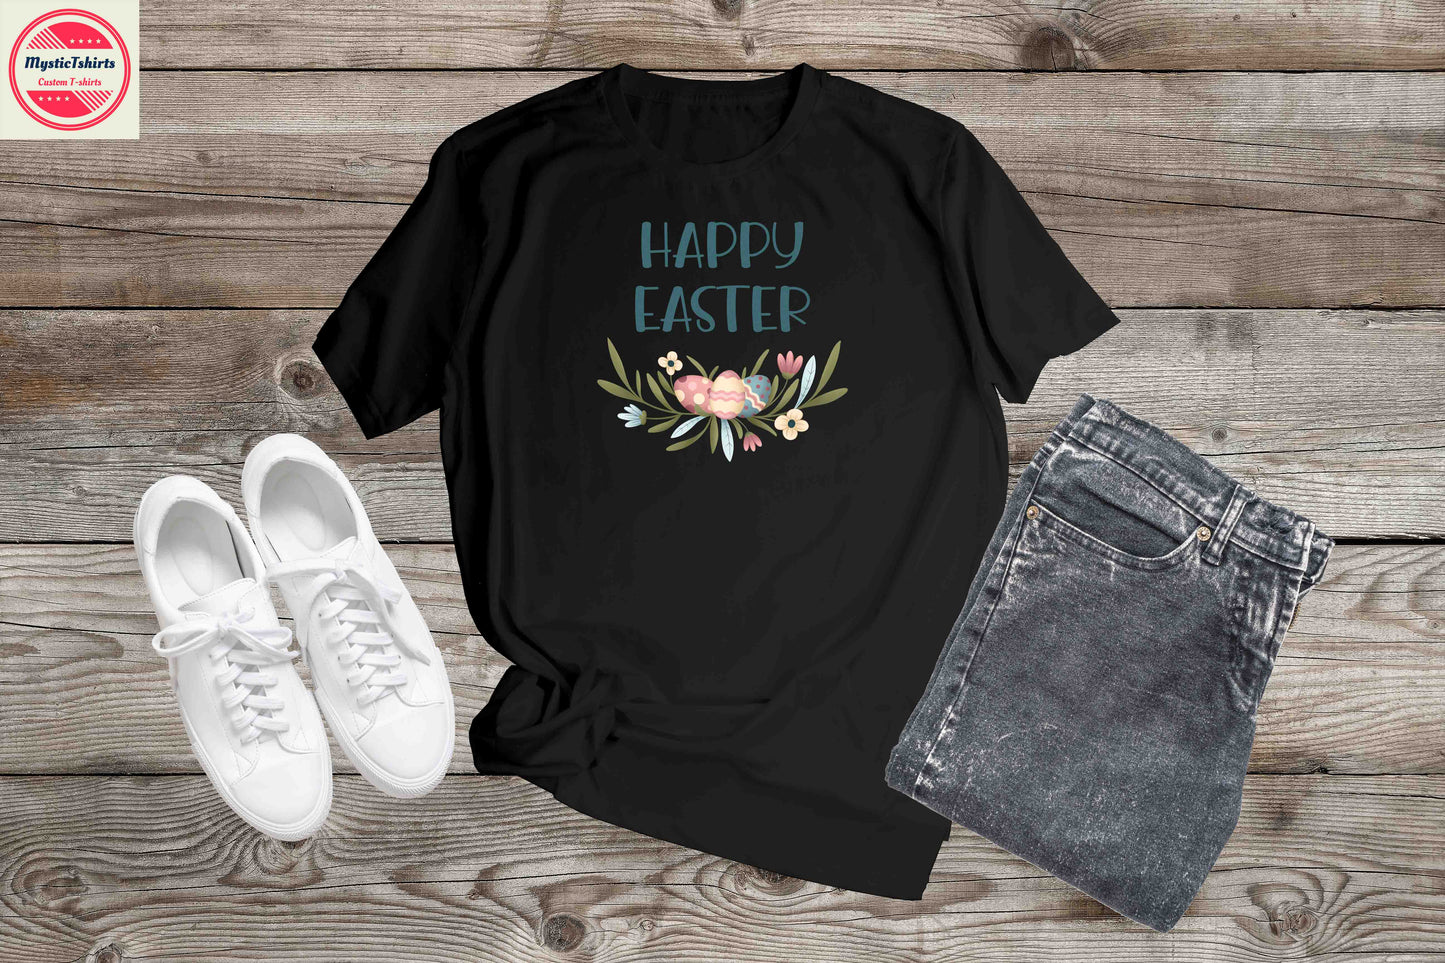 187. HAPPY EASTER, Custom Made Shirt, Personalized T-Shirt, Custom Text, Make Your Own Shirt, Custom Tee